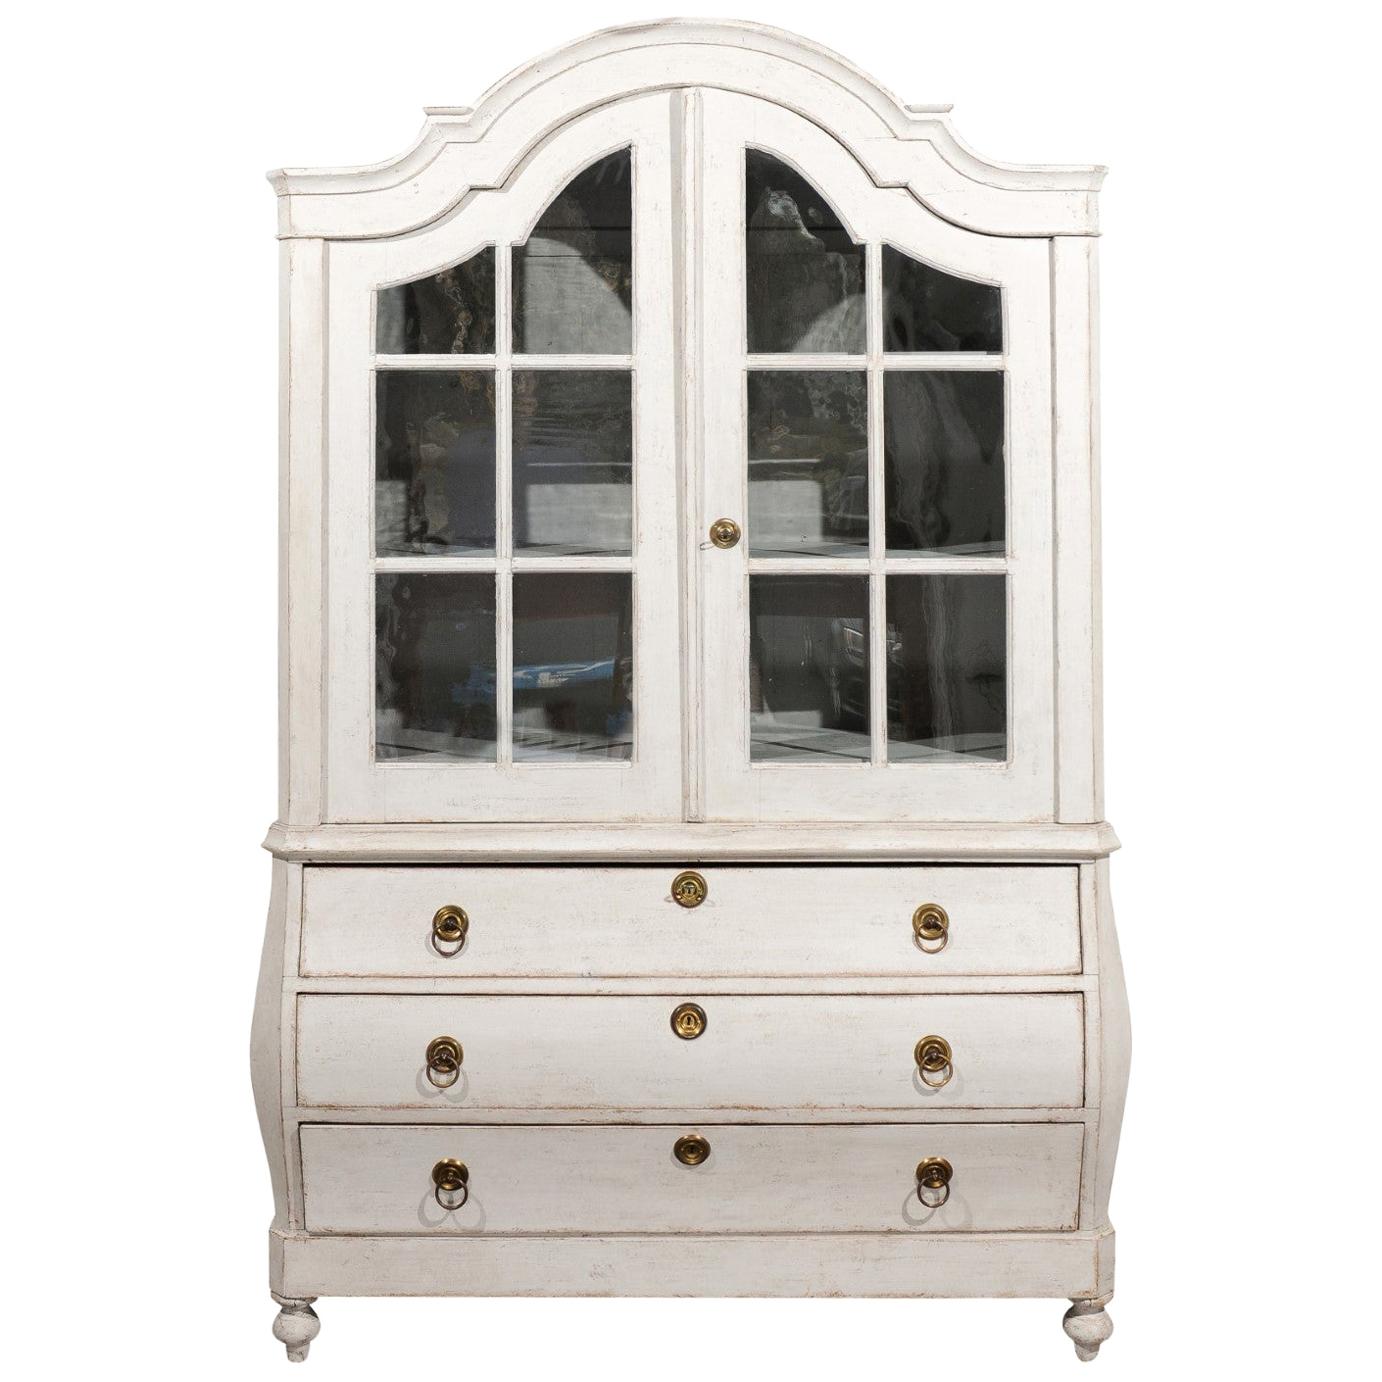 Swedish Rococo Style 19th Century Painted Wood Vitrine Cabinet with Glass Doors For Sale